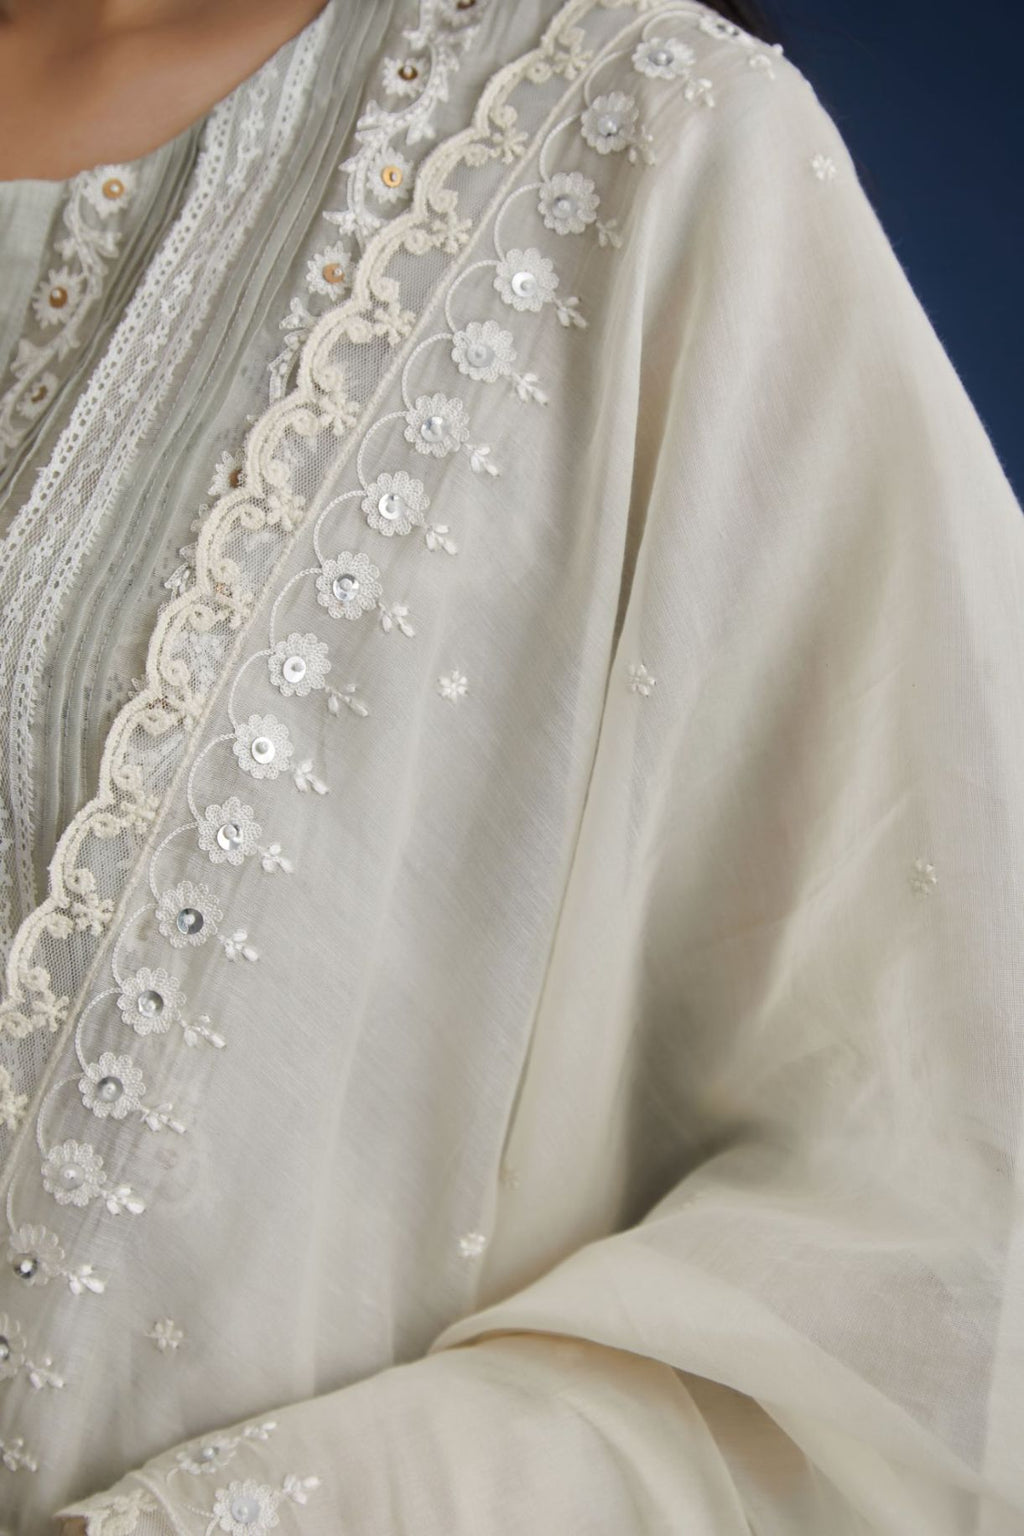 Off white cotton chanderi dupatta with all-over embroidery & edges are finished with lace, highlighted with sequins hand work